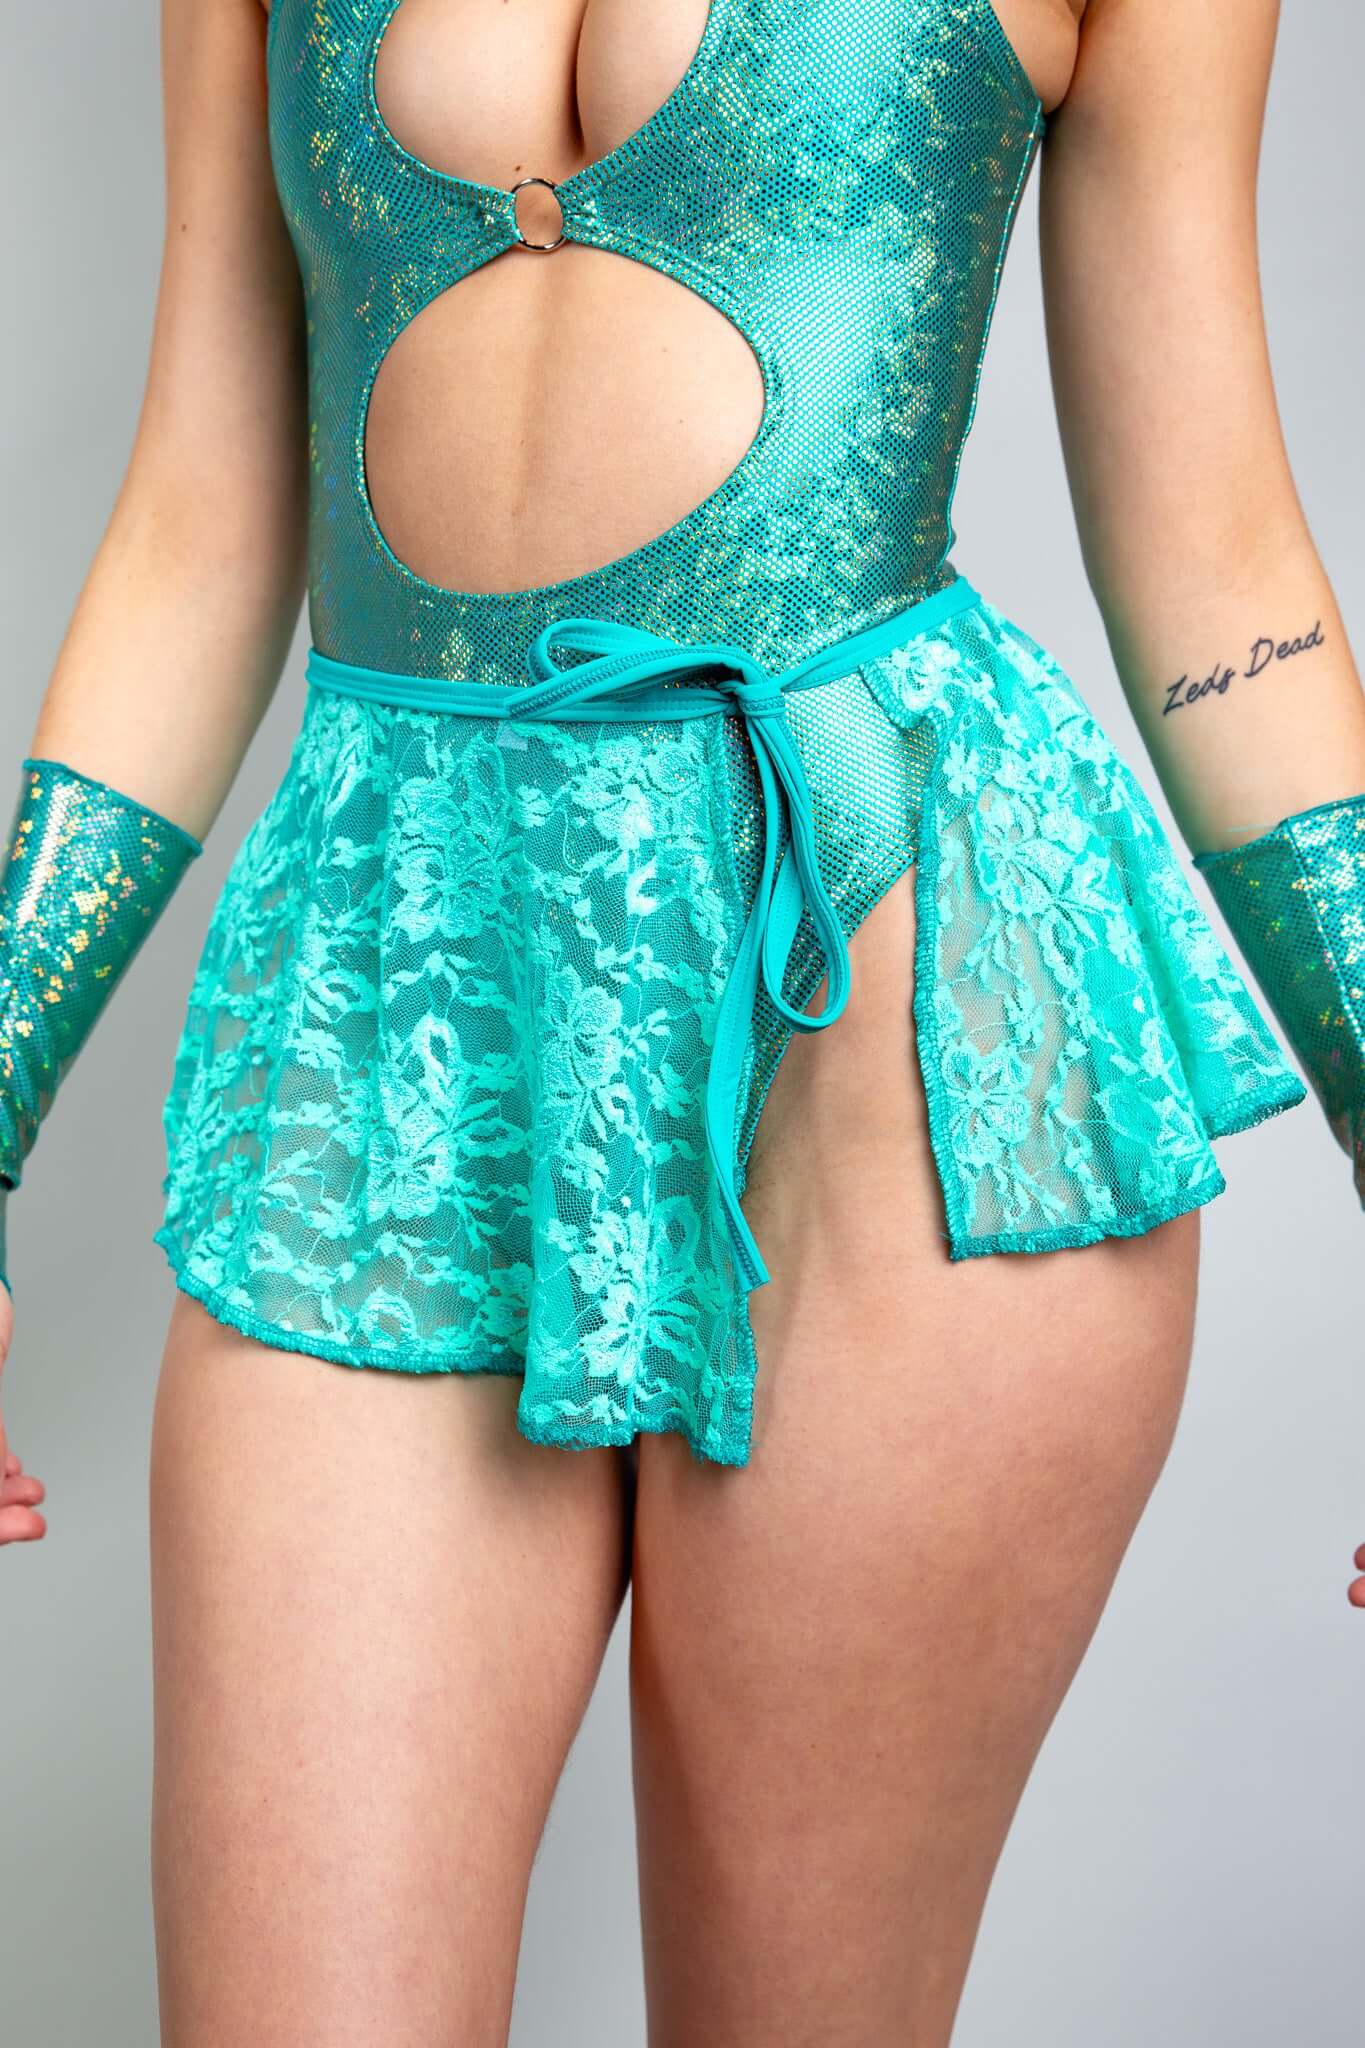 An up close photo of a woman wearing a teal, holographic bodysuit with two keyhole cutouts and a teal lace skirt that ties on the side.